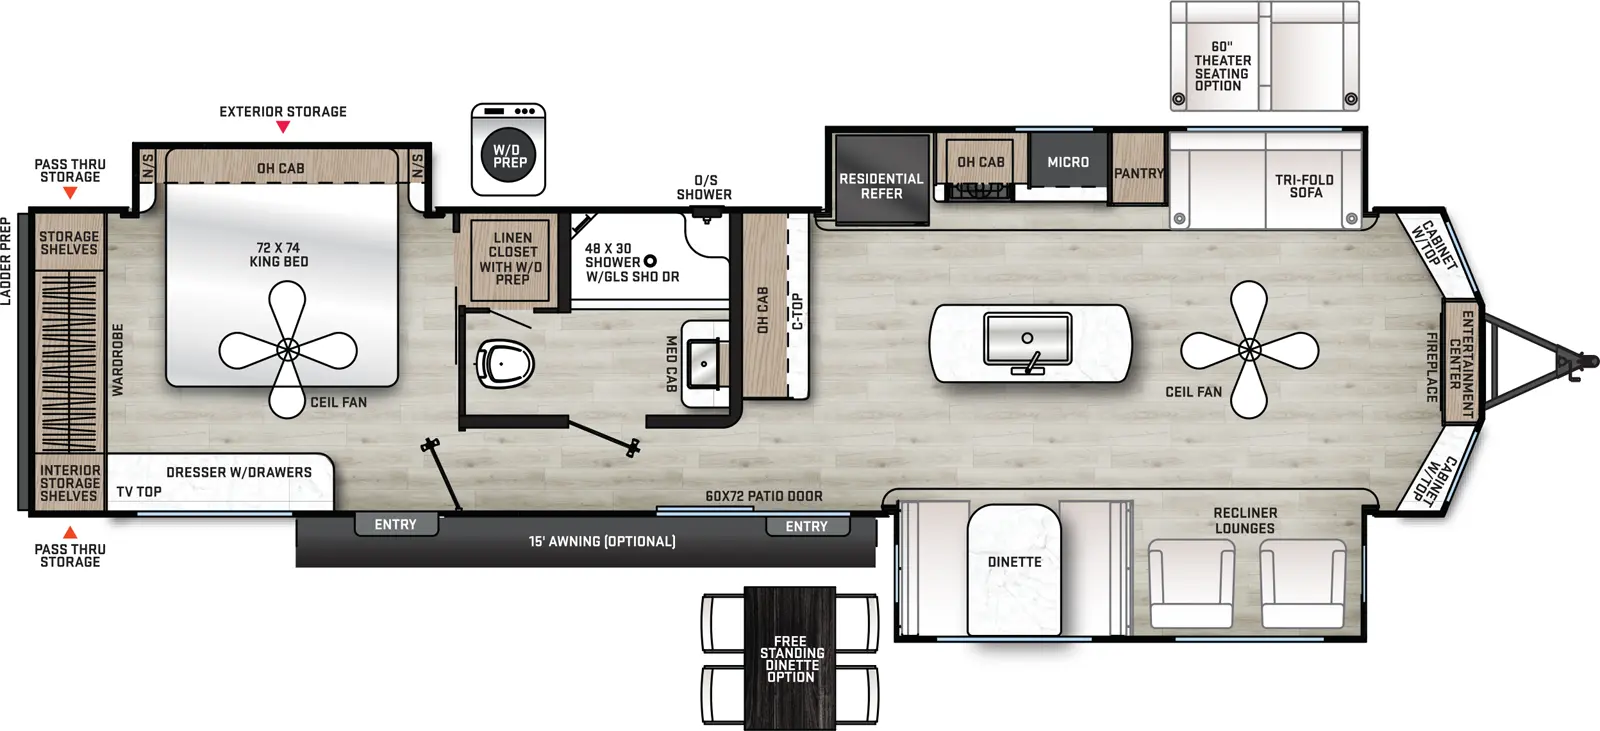 The 39MKTS has three slide outs and two entry doors. Exterior features an optional 15 foot awning. Interior layout front to back: entertainment center, with fireplace below and cabinet with top on either side; off door side slide out with tri-fold sofa (optional theater seating), pantry, microwave, cook top stove, overhead cabinet, and residential refrigerator; kitchen island with sink and paddle fan; door side slide out with recliner lounges and dinette; countertop with overhead cabinet along inner wall; patio door entry; off door side full bathroom with medicine cabinet and linen closet; rear bedroom with off door side king bed slide out with overhead cabinet and night stands on each side, closet with washer/dryer prep, dresser with drawers and TV top on door side, rear wardrobe with storage shelves, and second entry door. Optional free standing dinette available in place of standard dinette.